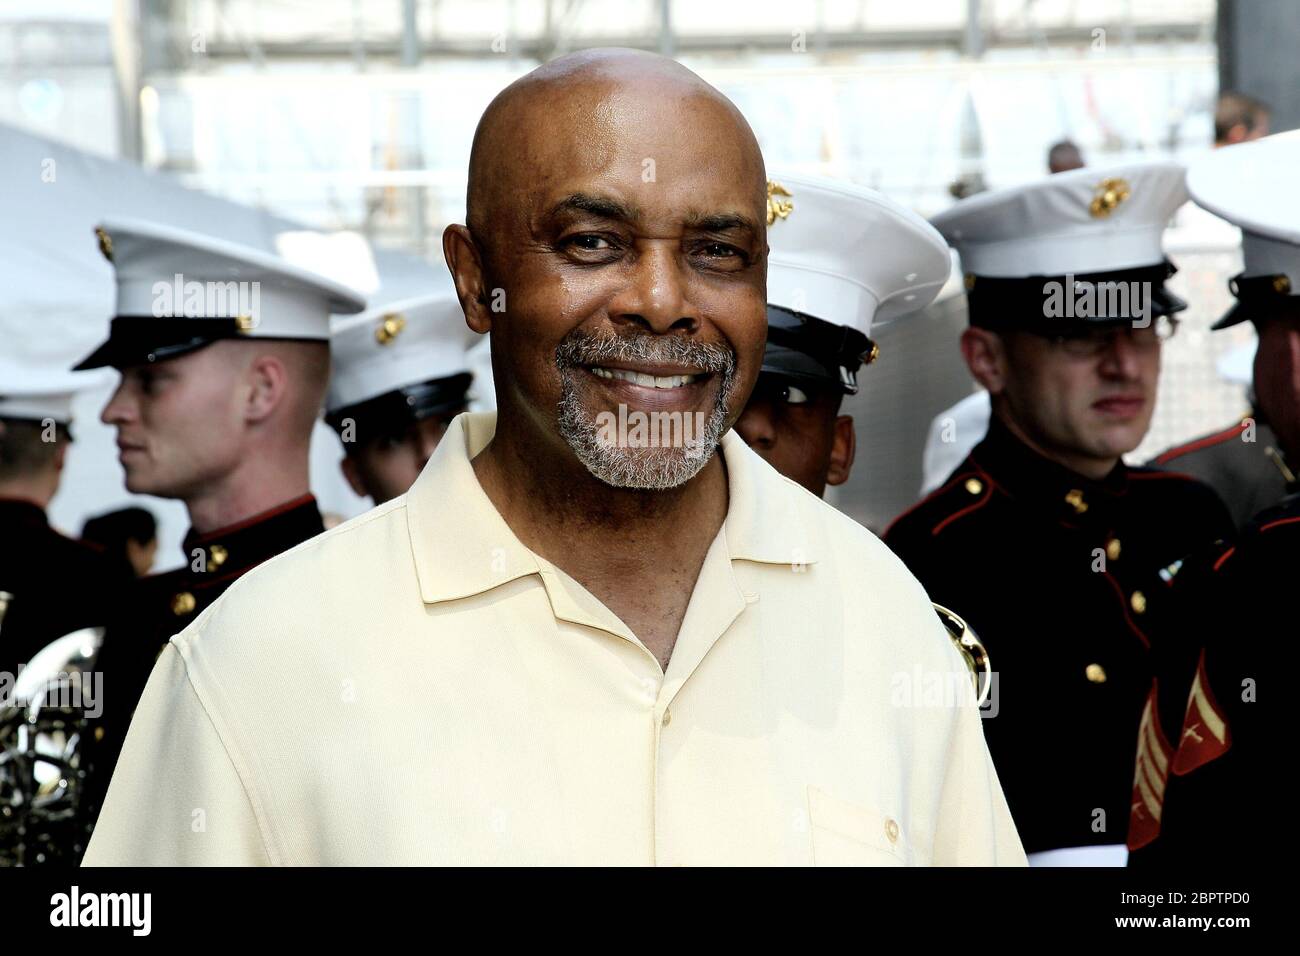 New York, NY, USA. 26 May, 2012. Roscoe Orman, aka, Gordon Robinson, poses with members of Quantico Marine Corps Band at the Sesame Workshop's 'Little Children, Big Challenges' Outreach Launch at the Intrepid Sea-Air-Space Museum. Credit: Steve Mack/Alamy Stock Photo